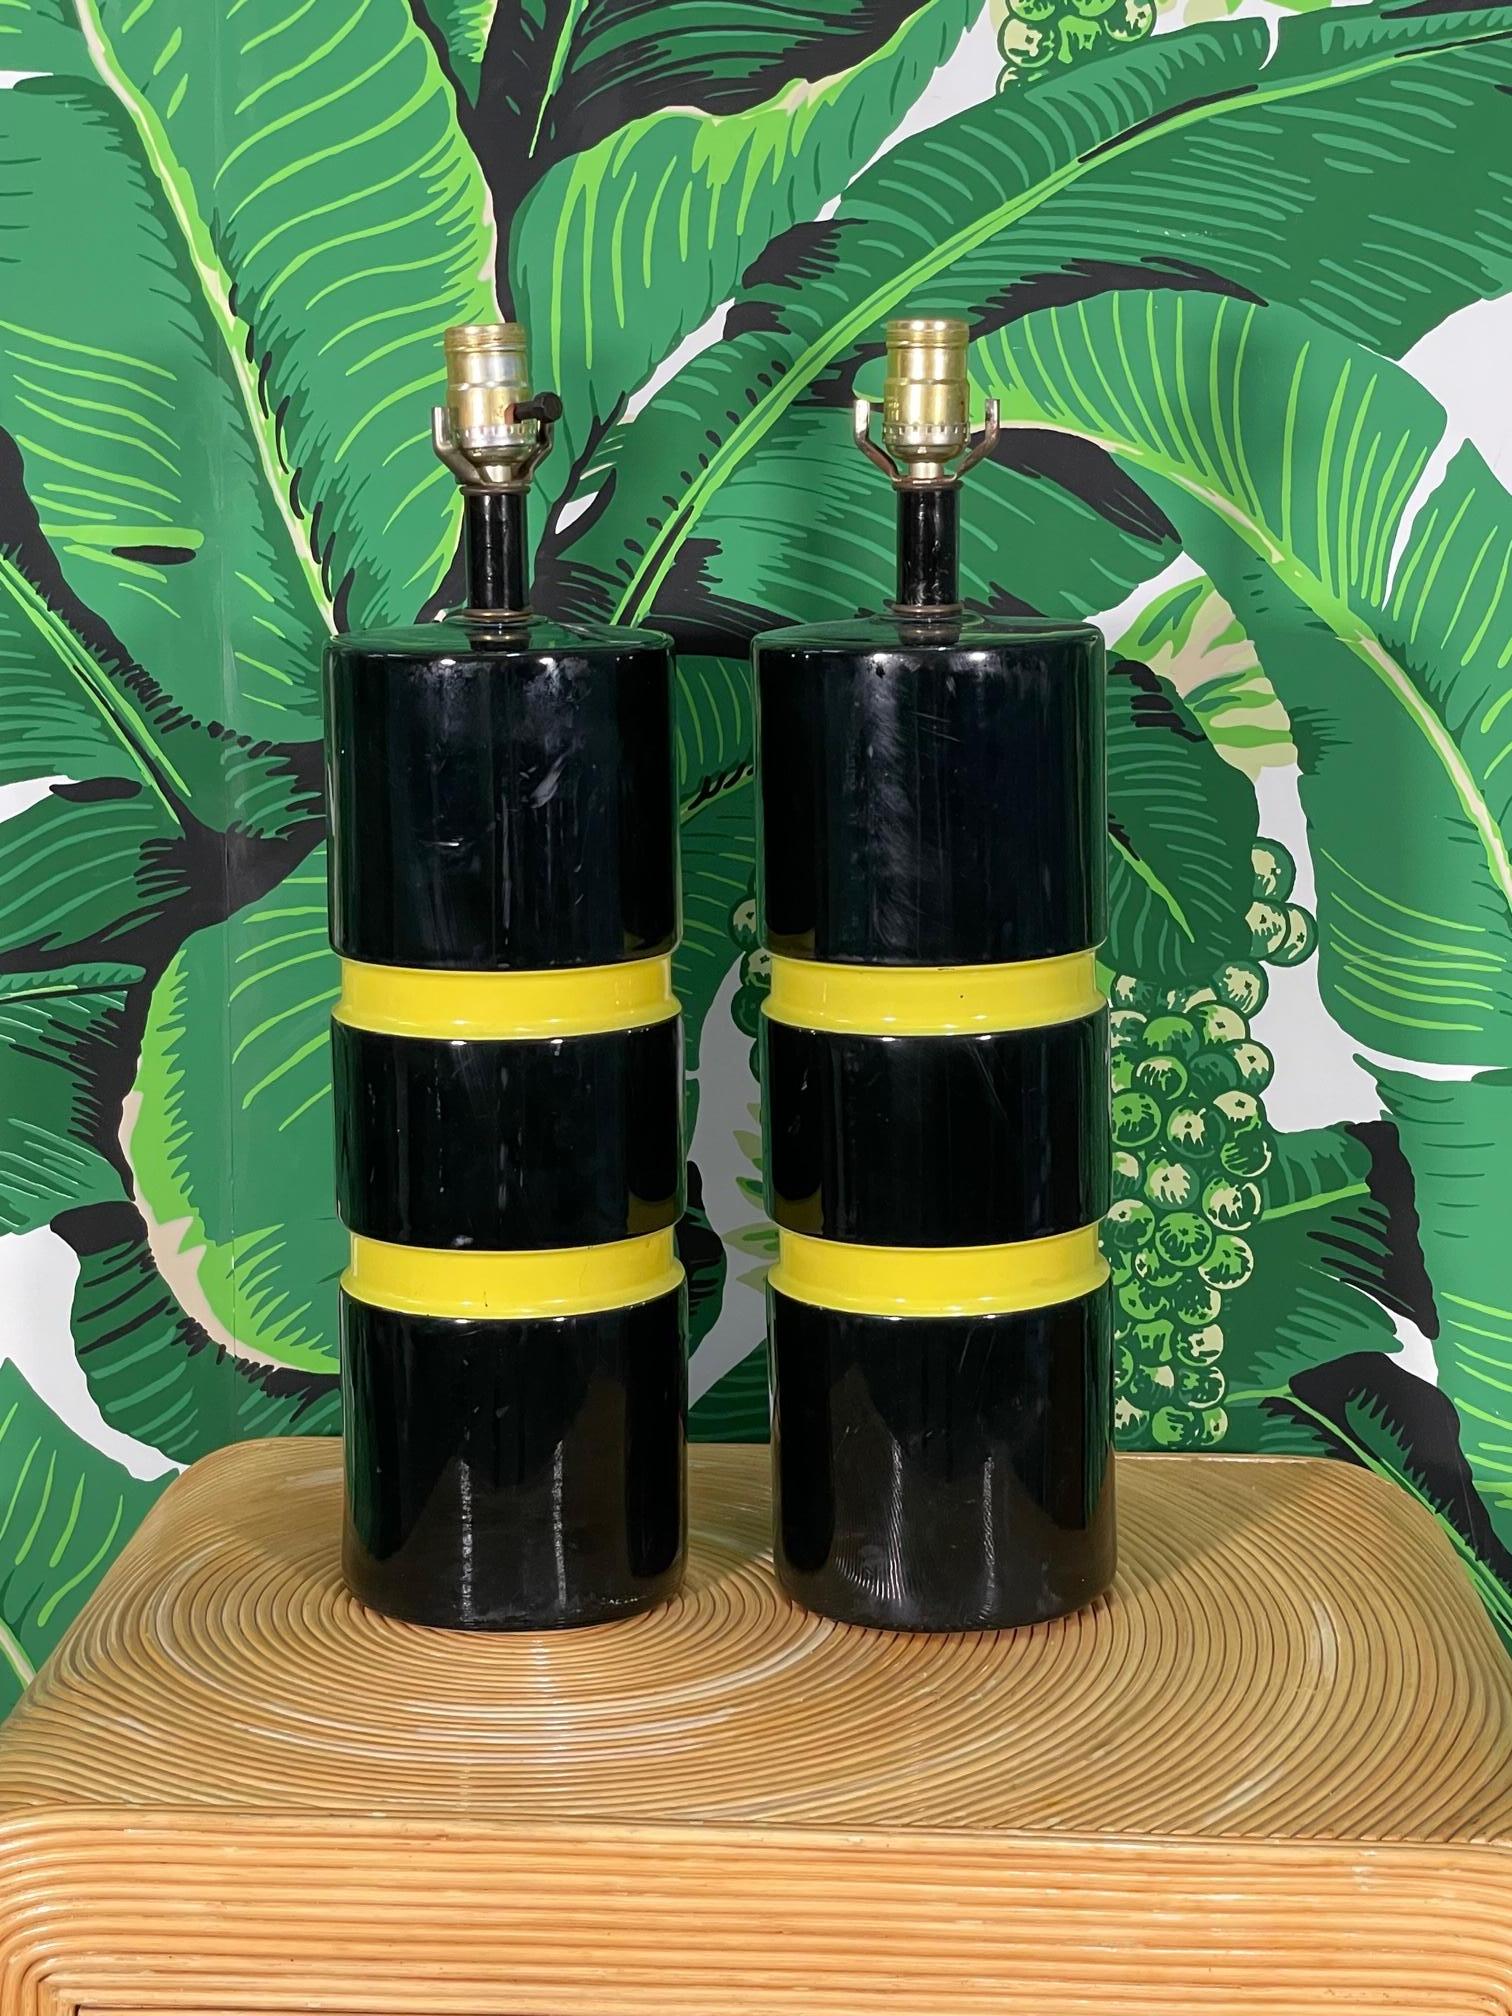 Pair of Hollywood Regency style table lamps feature a ceramic body in gloss black with horizontal bands of yellow insets. Good condition with minor imperfections consistent with age, see photos for condition details.

